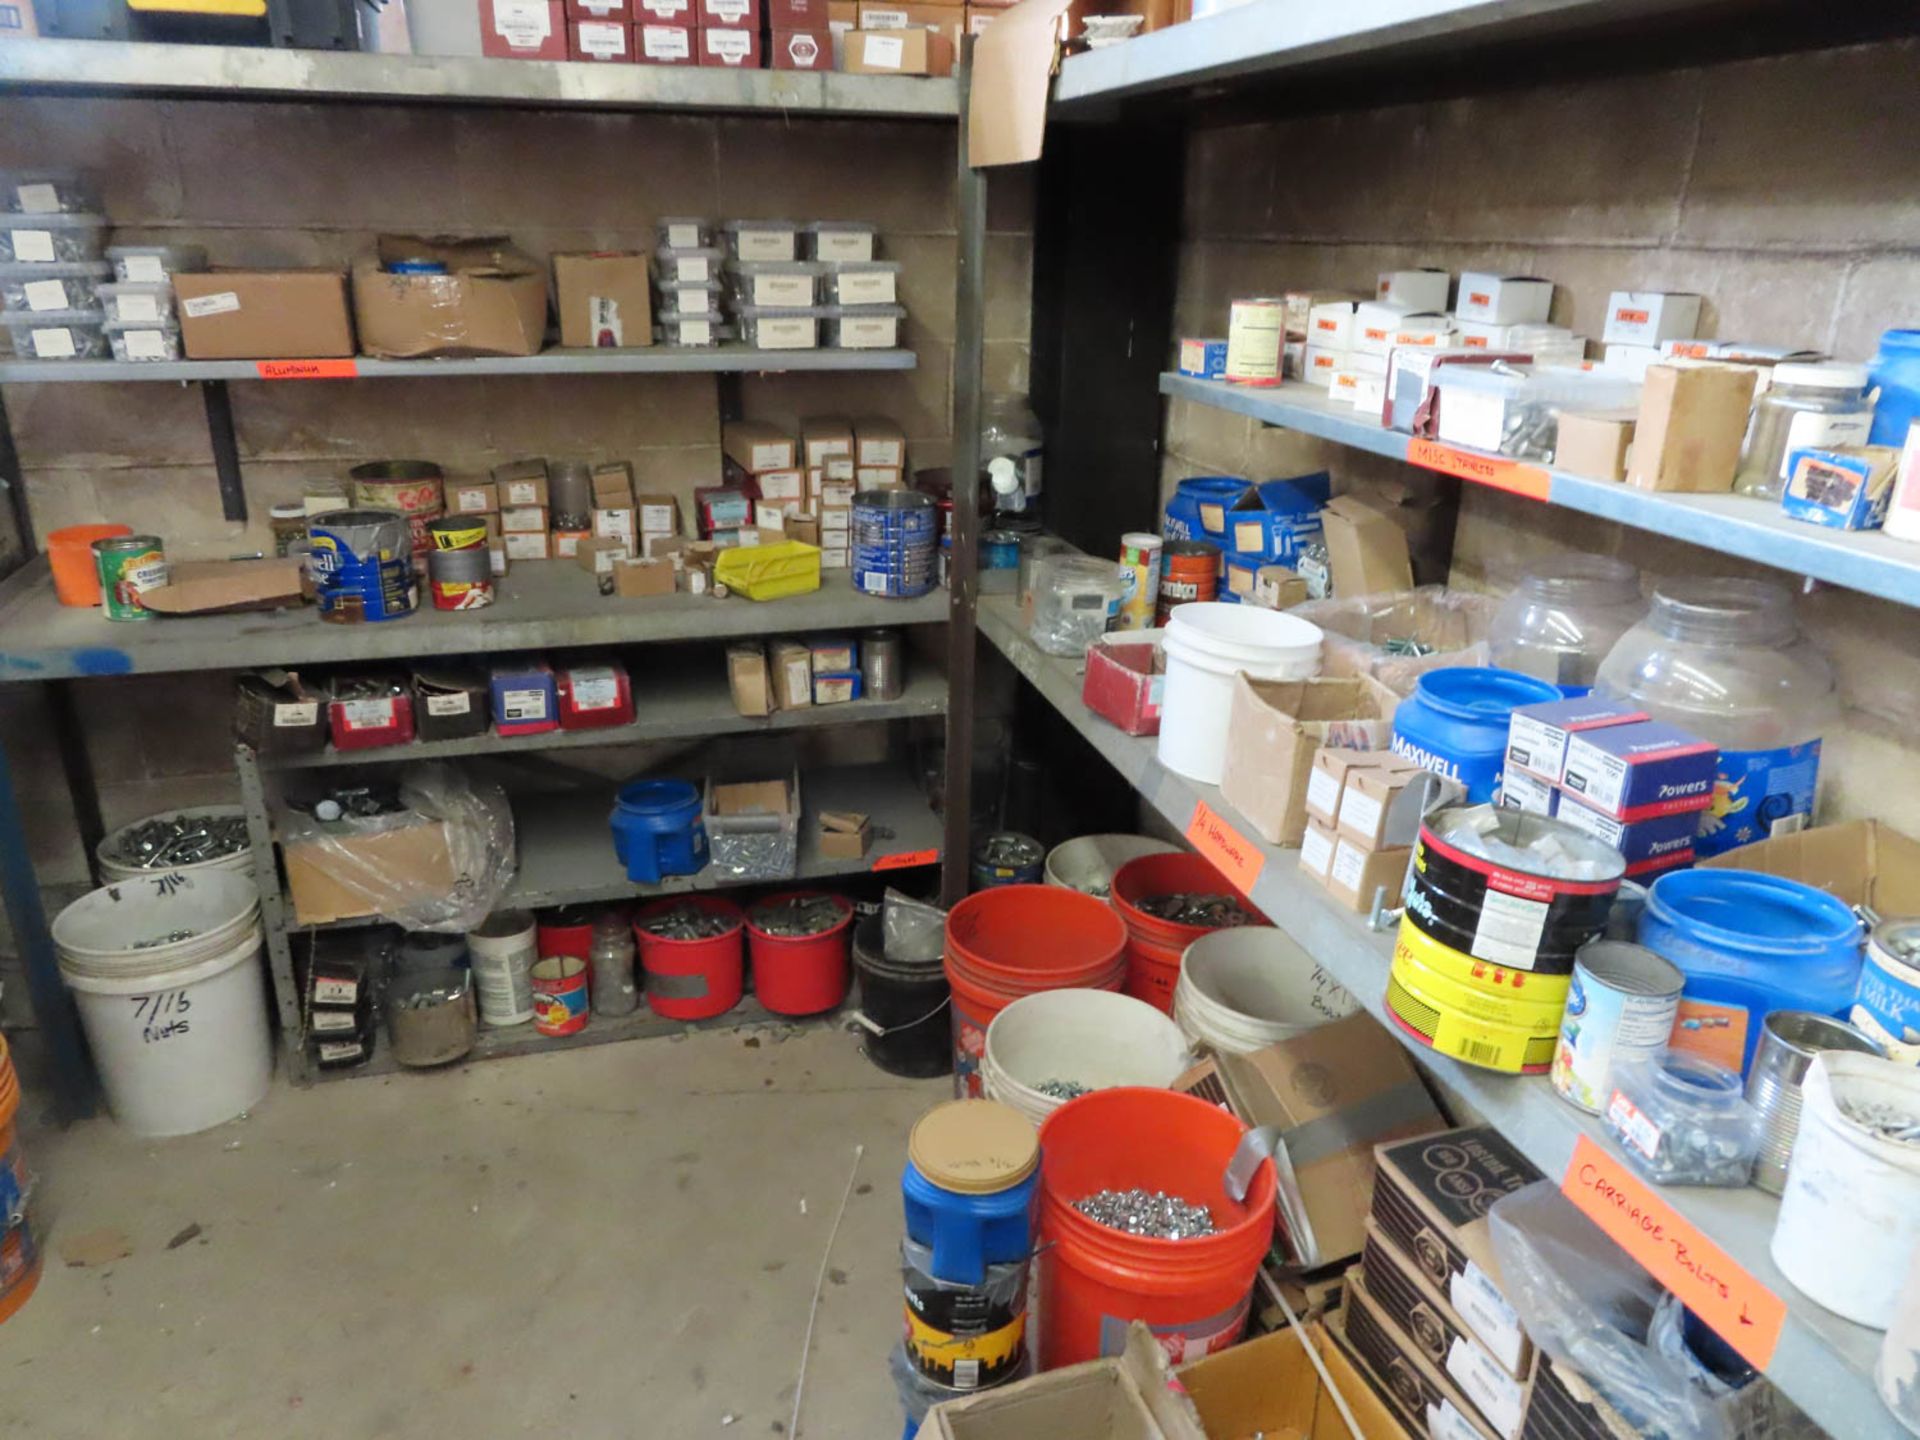 CONTENTS OF STOCK AREA: SCREWS, NUTS, BOLTS, SHELVES, CLAMPS, SEALANTS, ETC. (NO CAGE) - Image 3 of 5